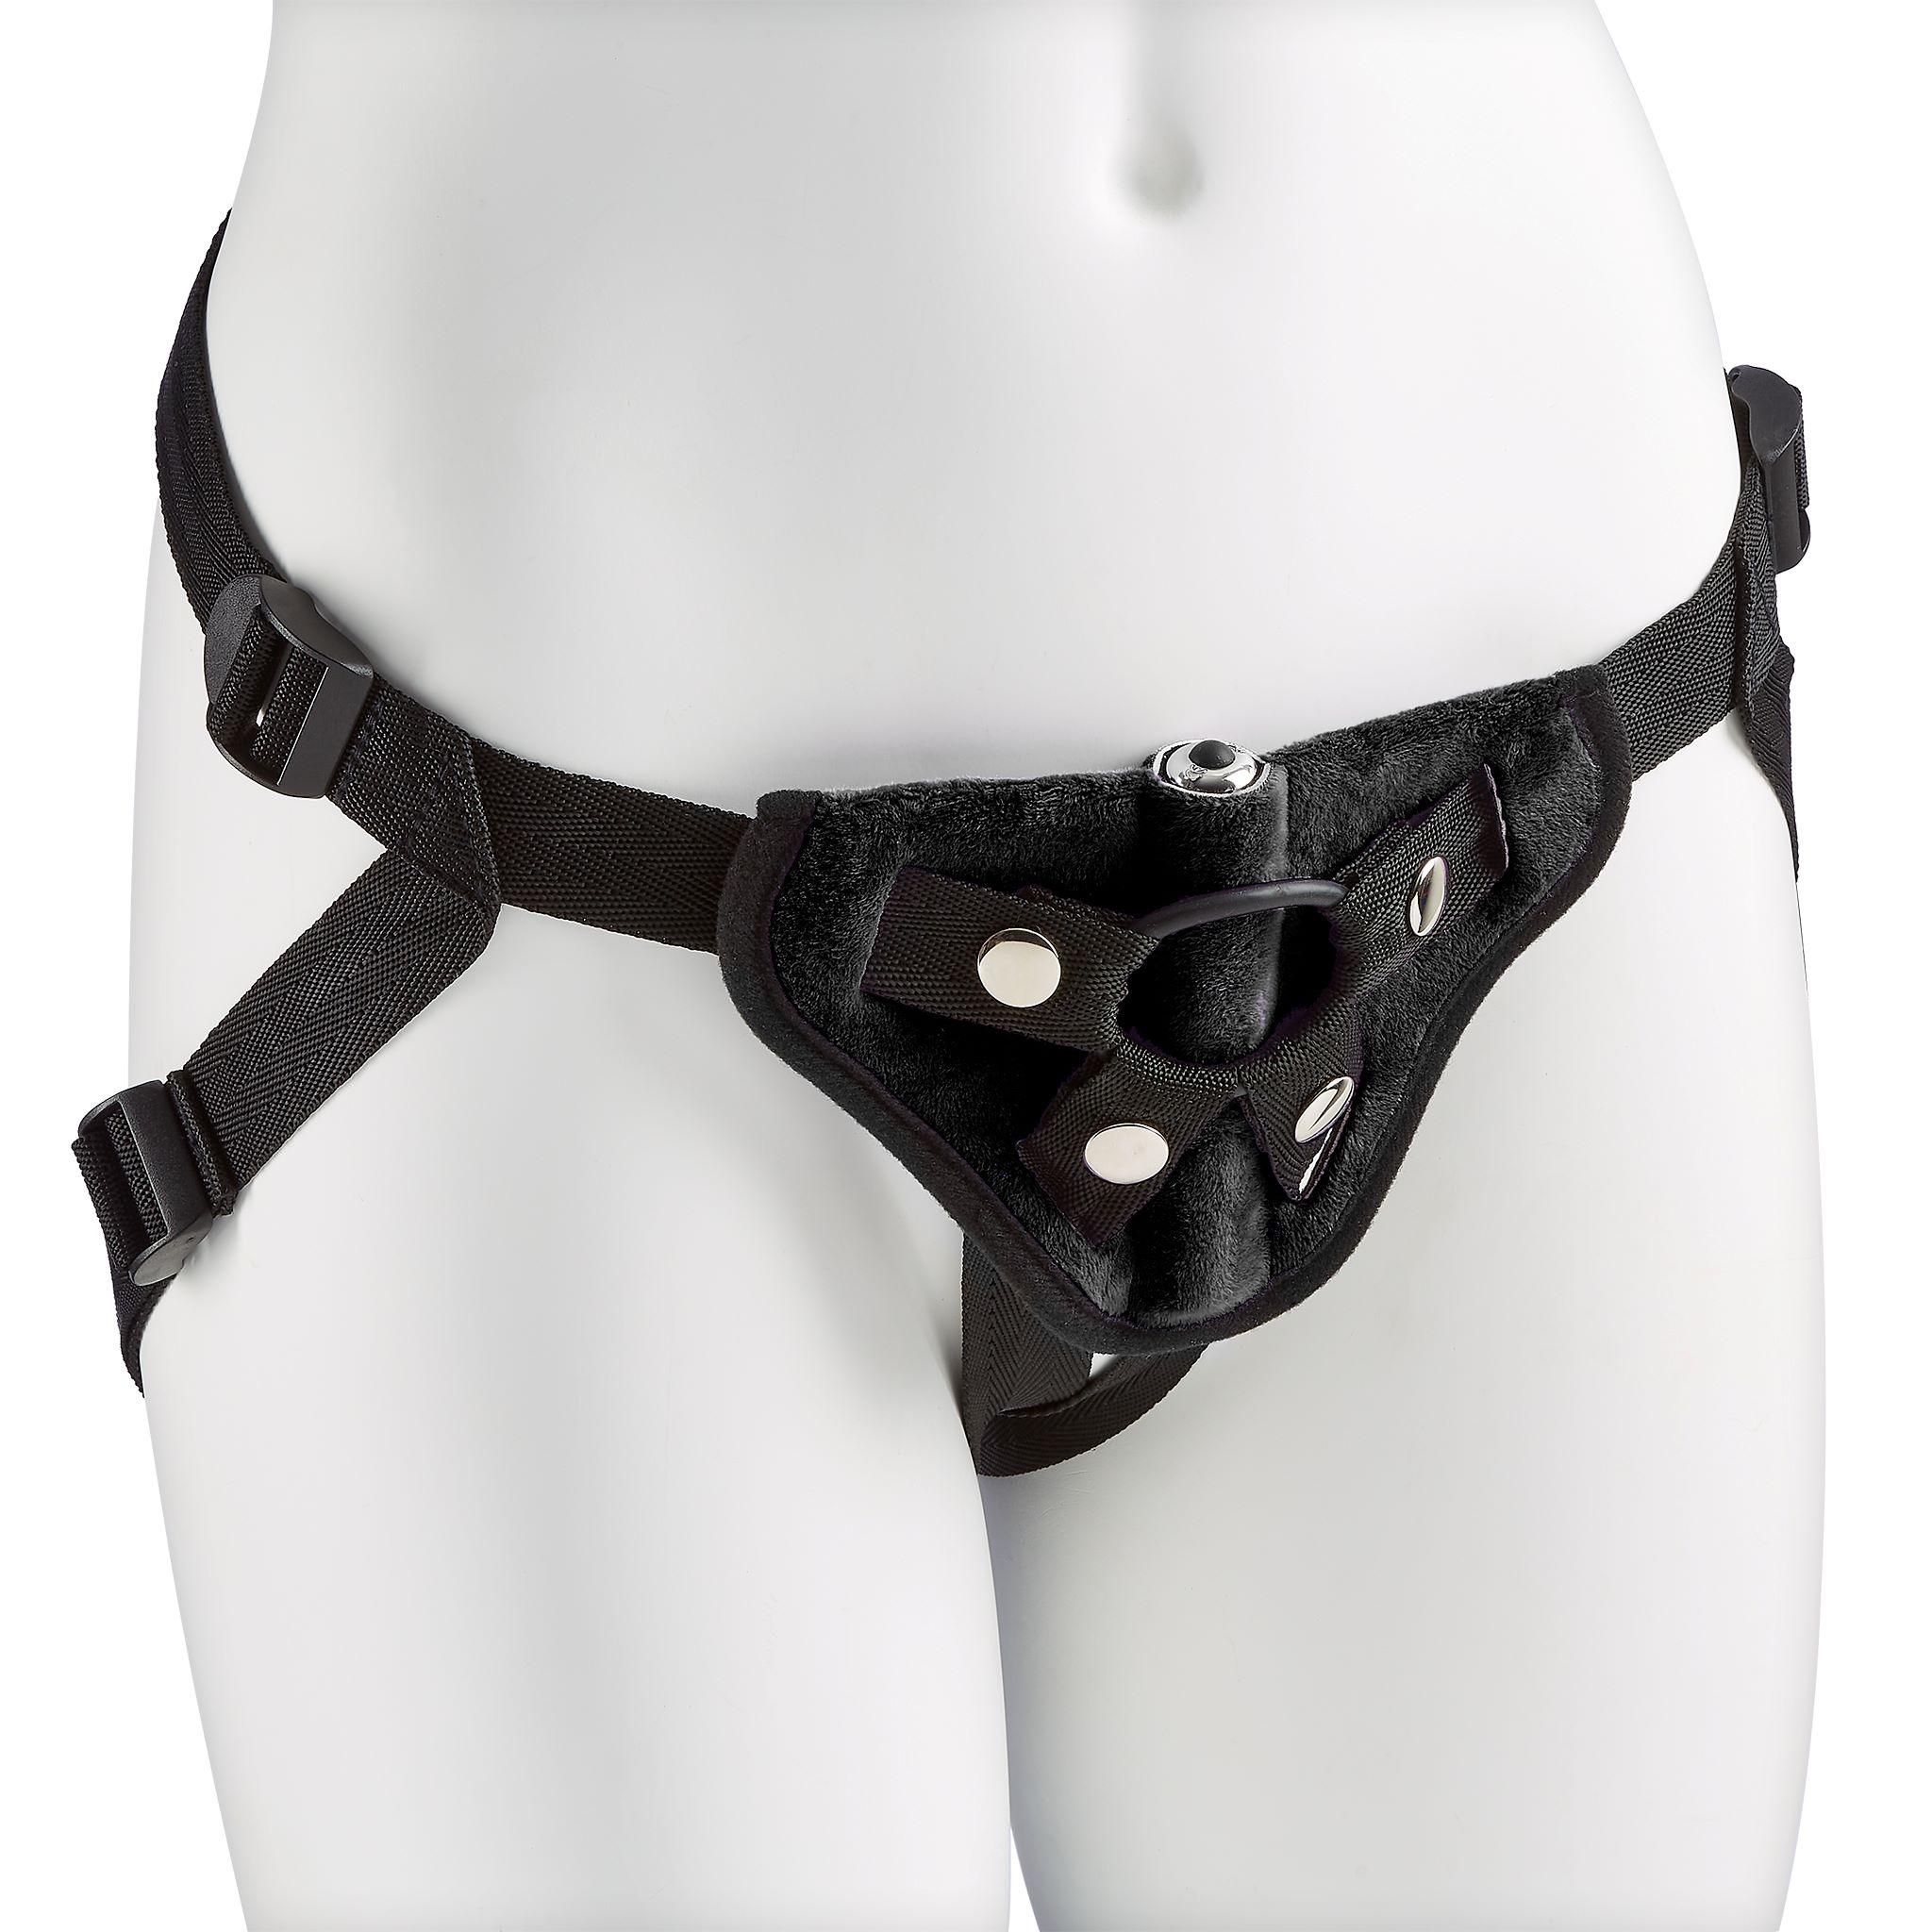 STRAP-ON HARNESS KIT BLACK - Click Image to Close